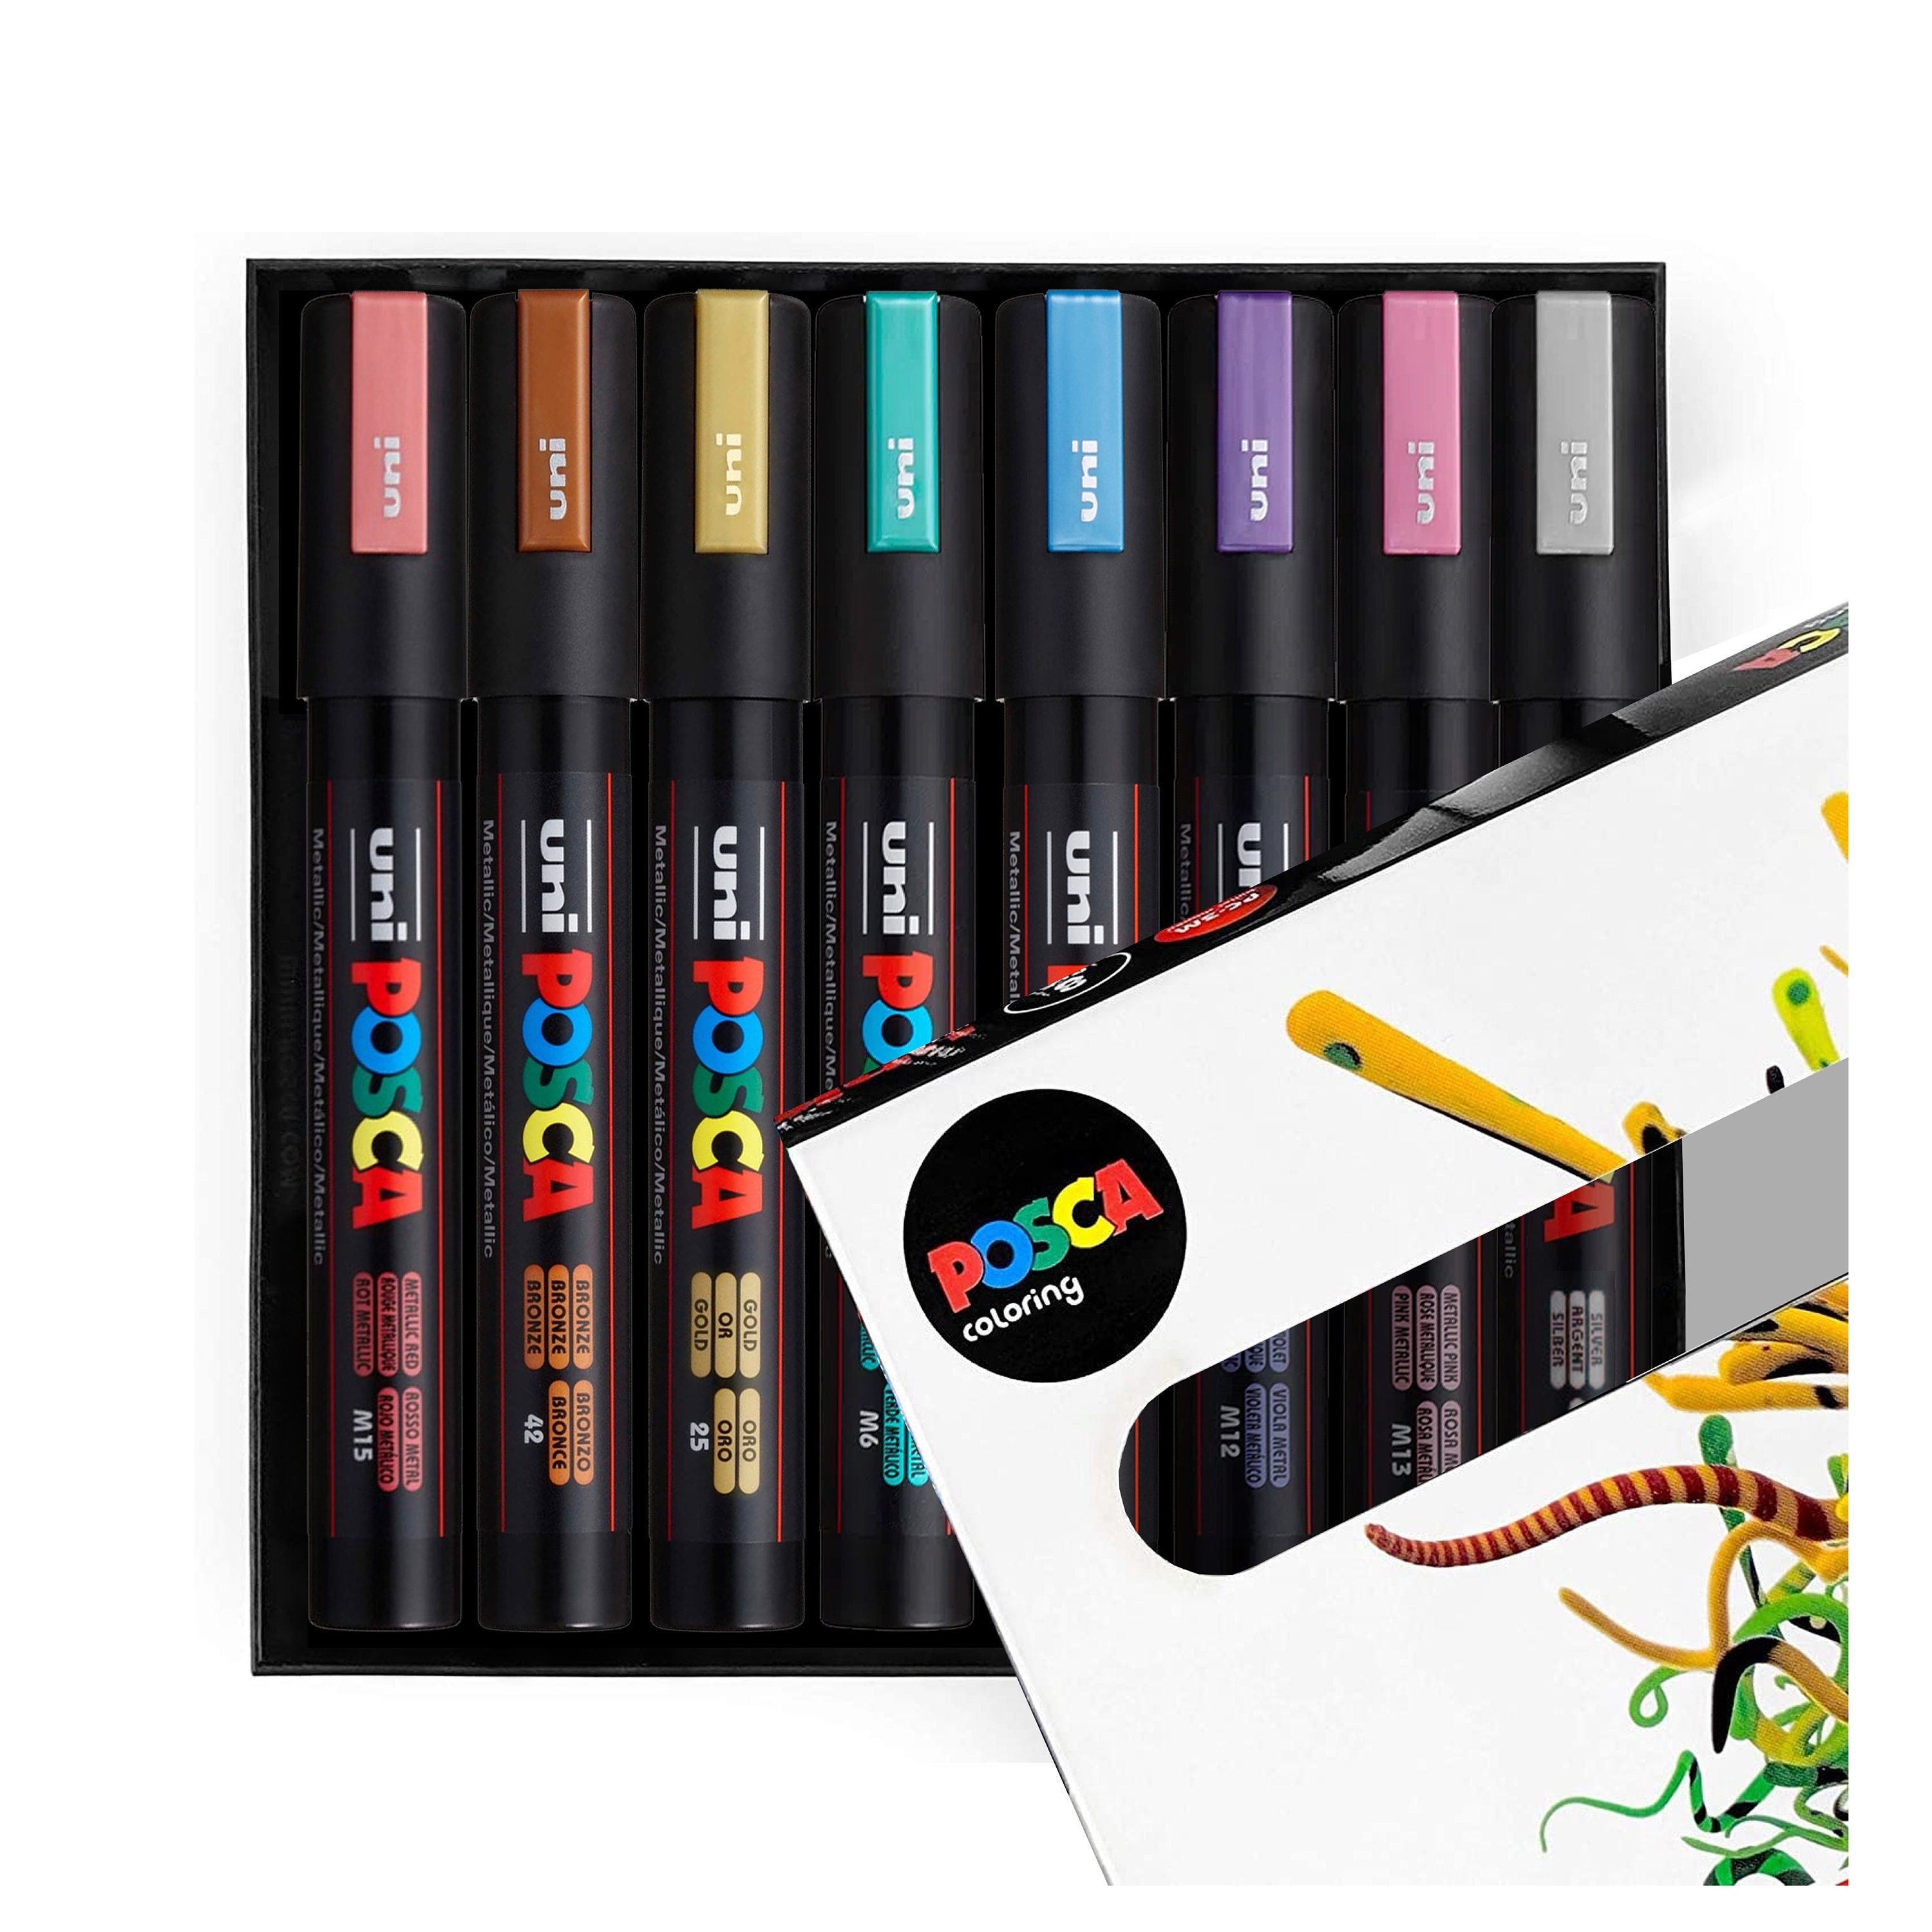 POSCA 5M 1.8-2.5mm Bullet Shaped Soft Color Paint M Pen - 8 Soft Shades -  Pack of 8